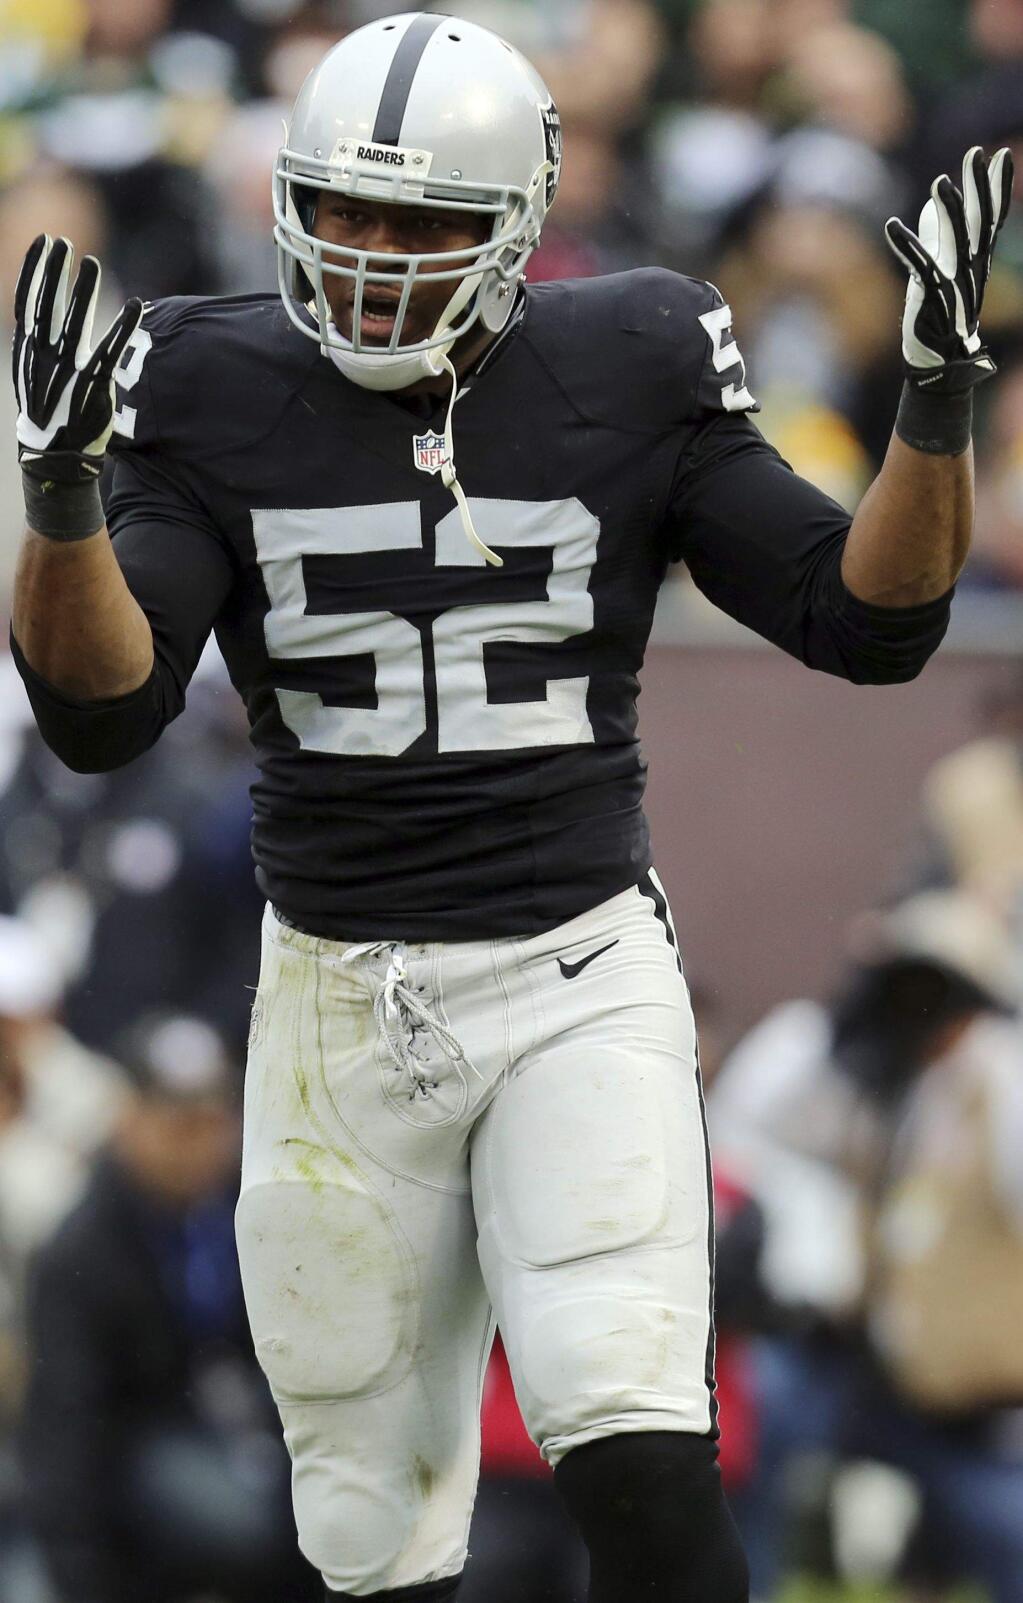 Raiders linebacker and defensive end Khalil Mack was credited with 77 tackles and 15 sacks in 2015 as well as two forced fumbles. (Ryan Kang / Associated Press)